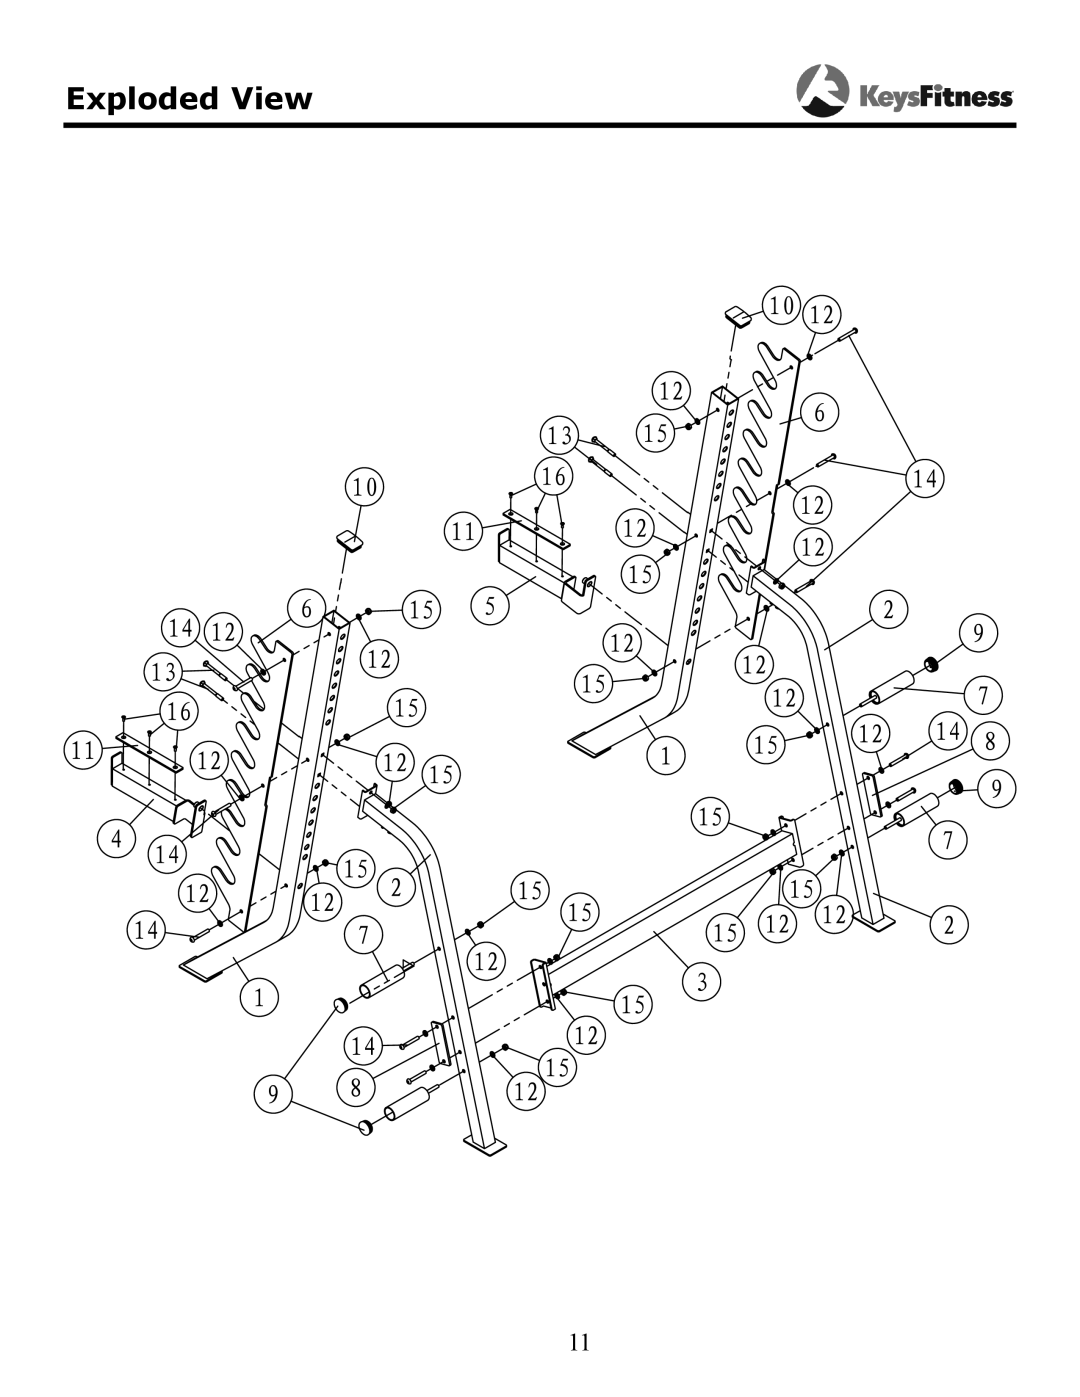 Keys Fitness KF-SS owner manual Exploded View 